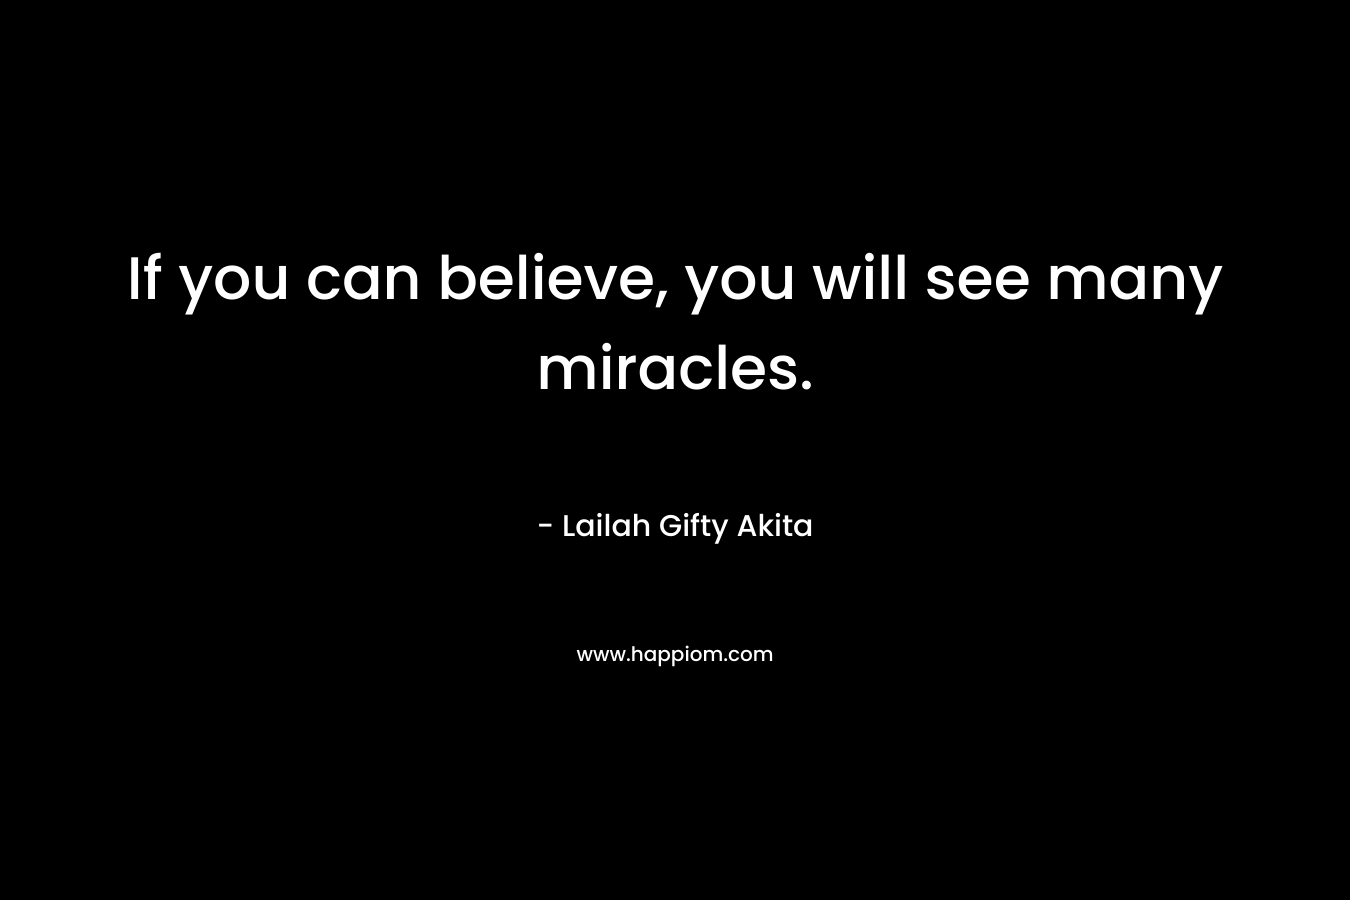 If you can believe, you will see many miracles.